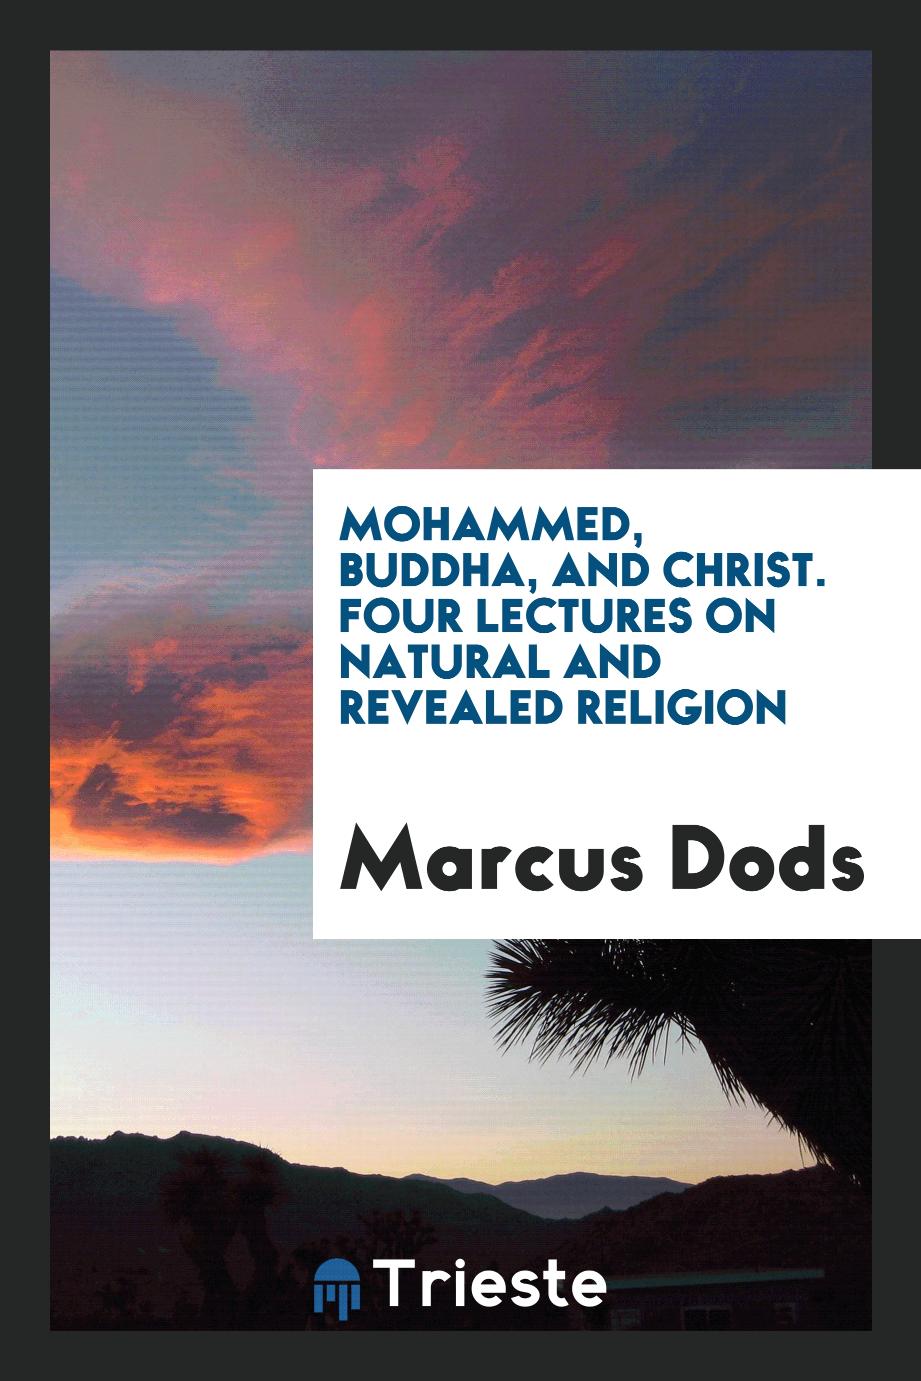 Mohammed, Buddha, and Christ. Four lectures on natural and revealed religion